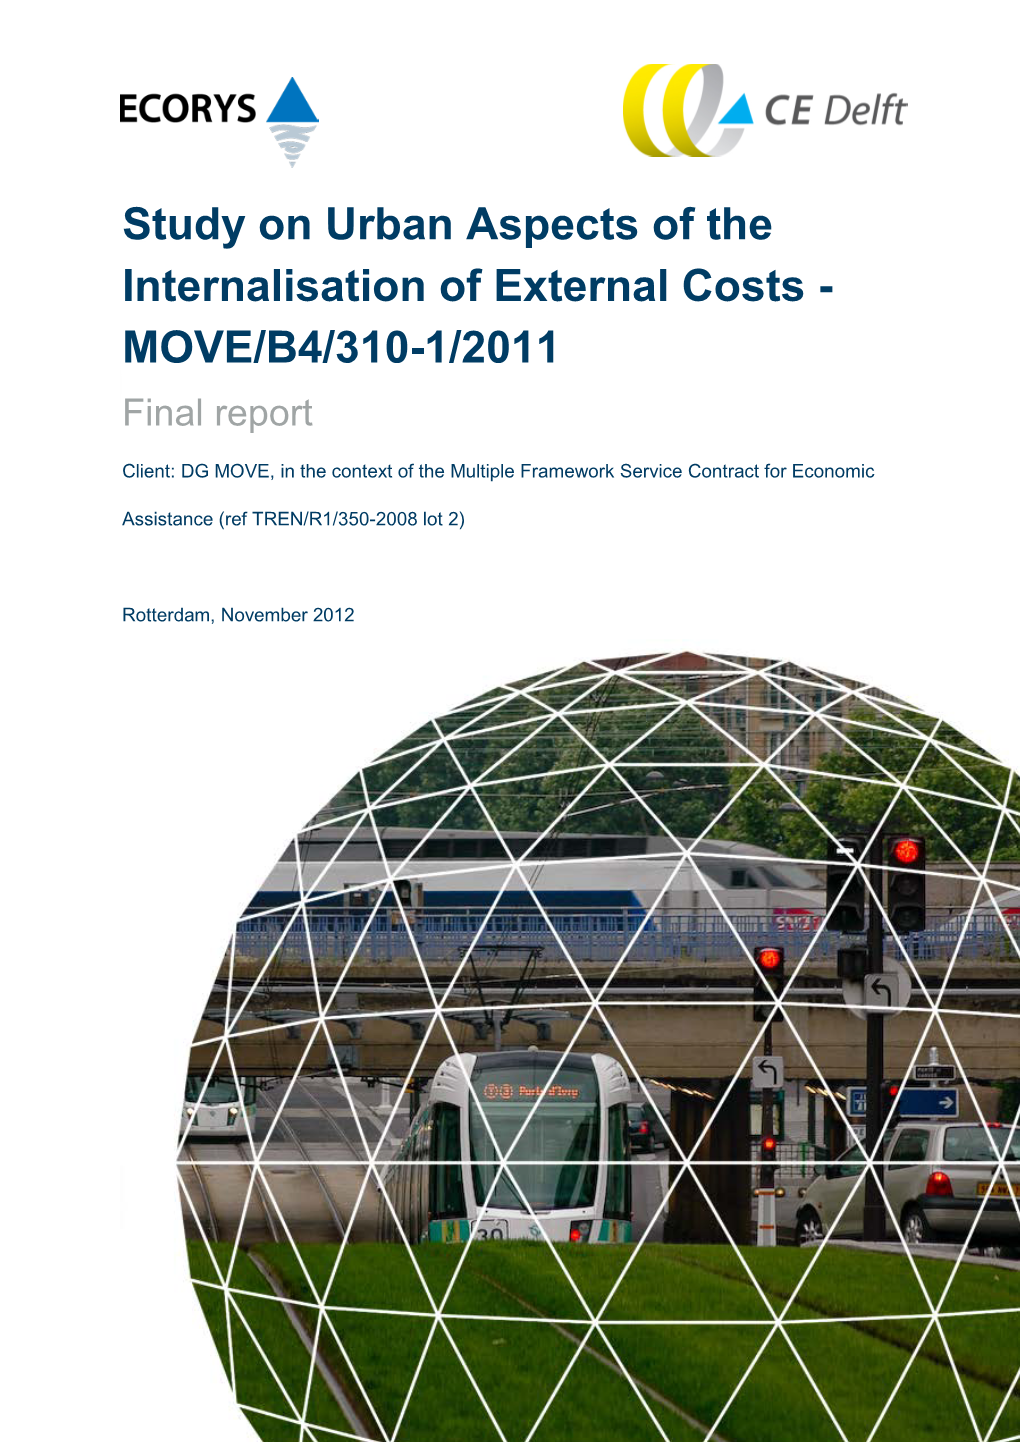 Study on Urban Aspects of the Internalisation of External Costs - MOVE/B4/310-1/2011 Final Report